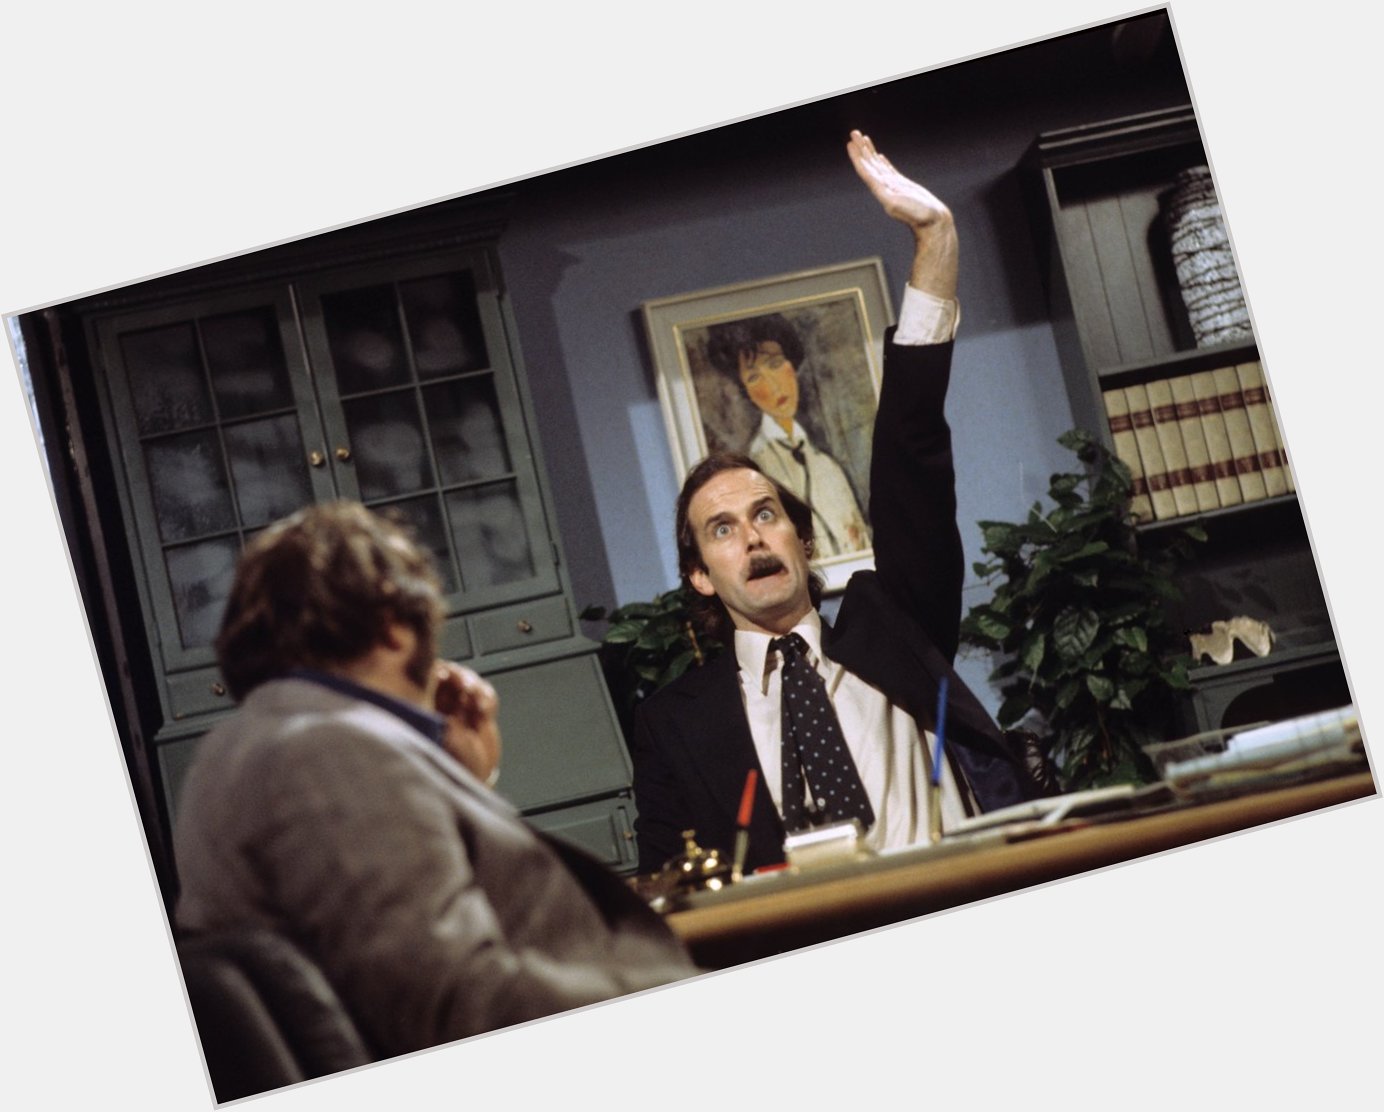 Happy Birthday to the multi-talented John Cleese!
He is 80 today. 